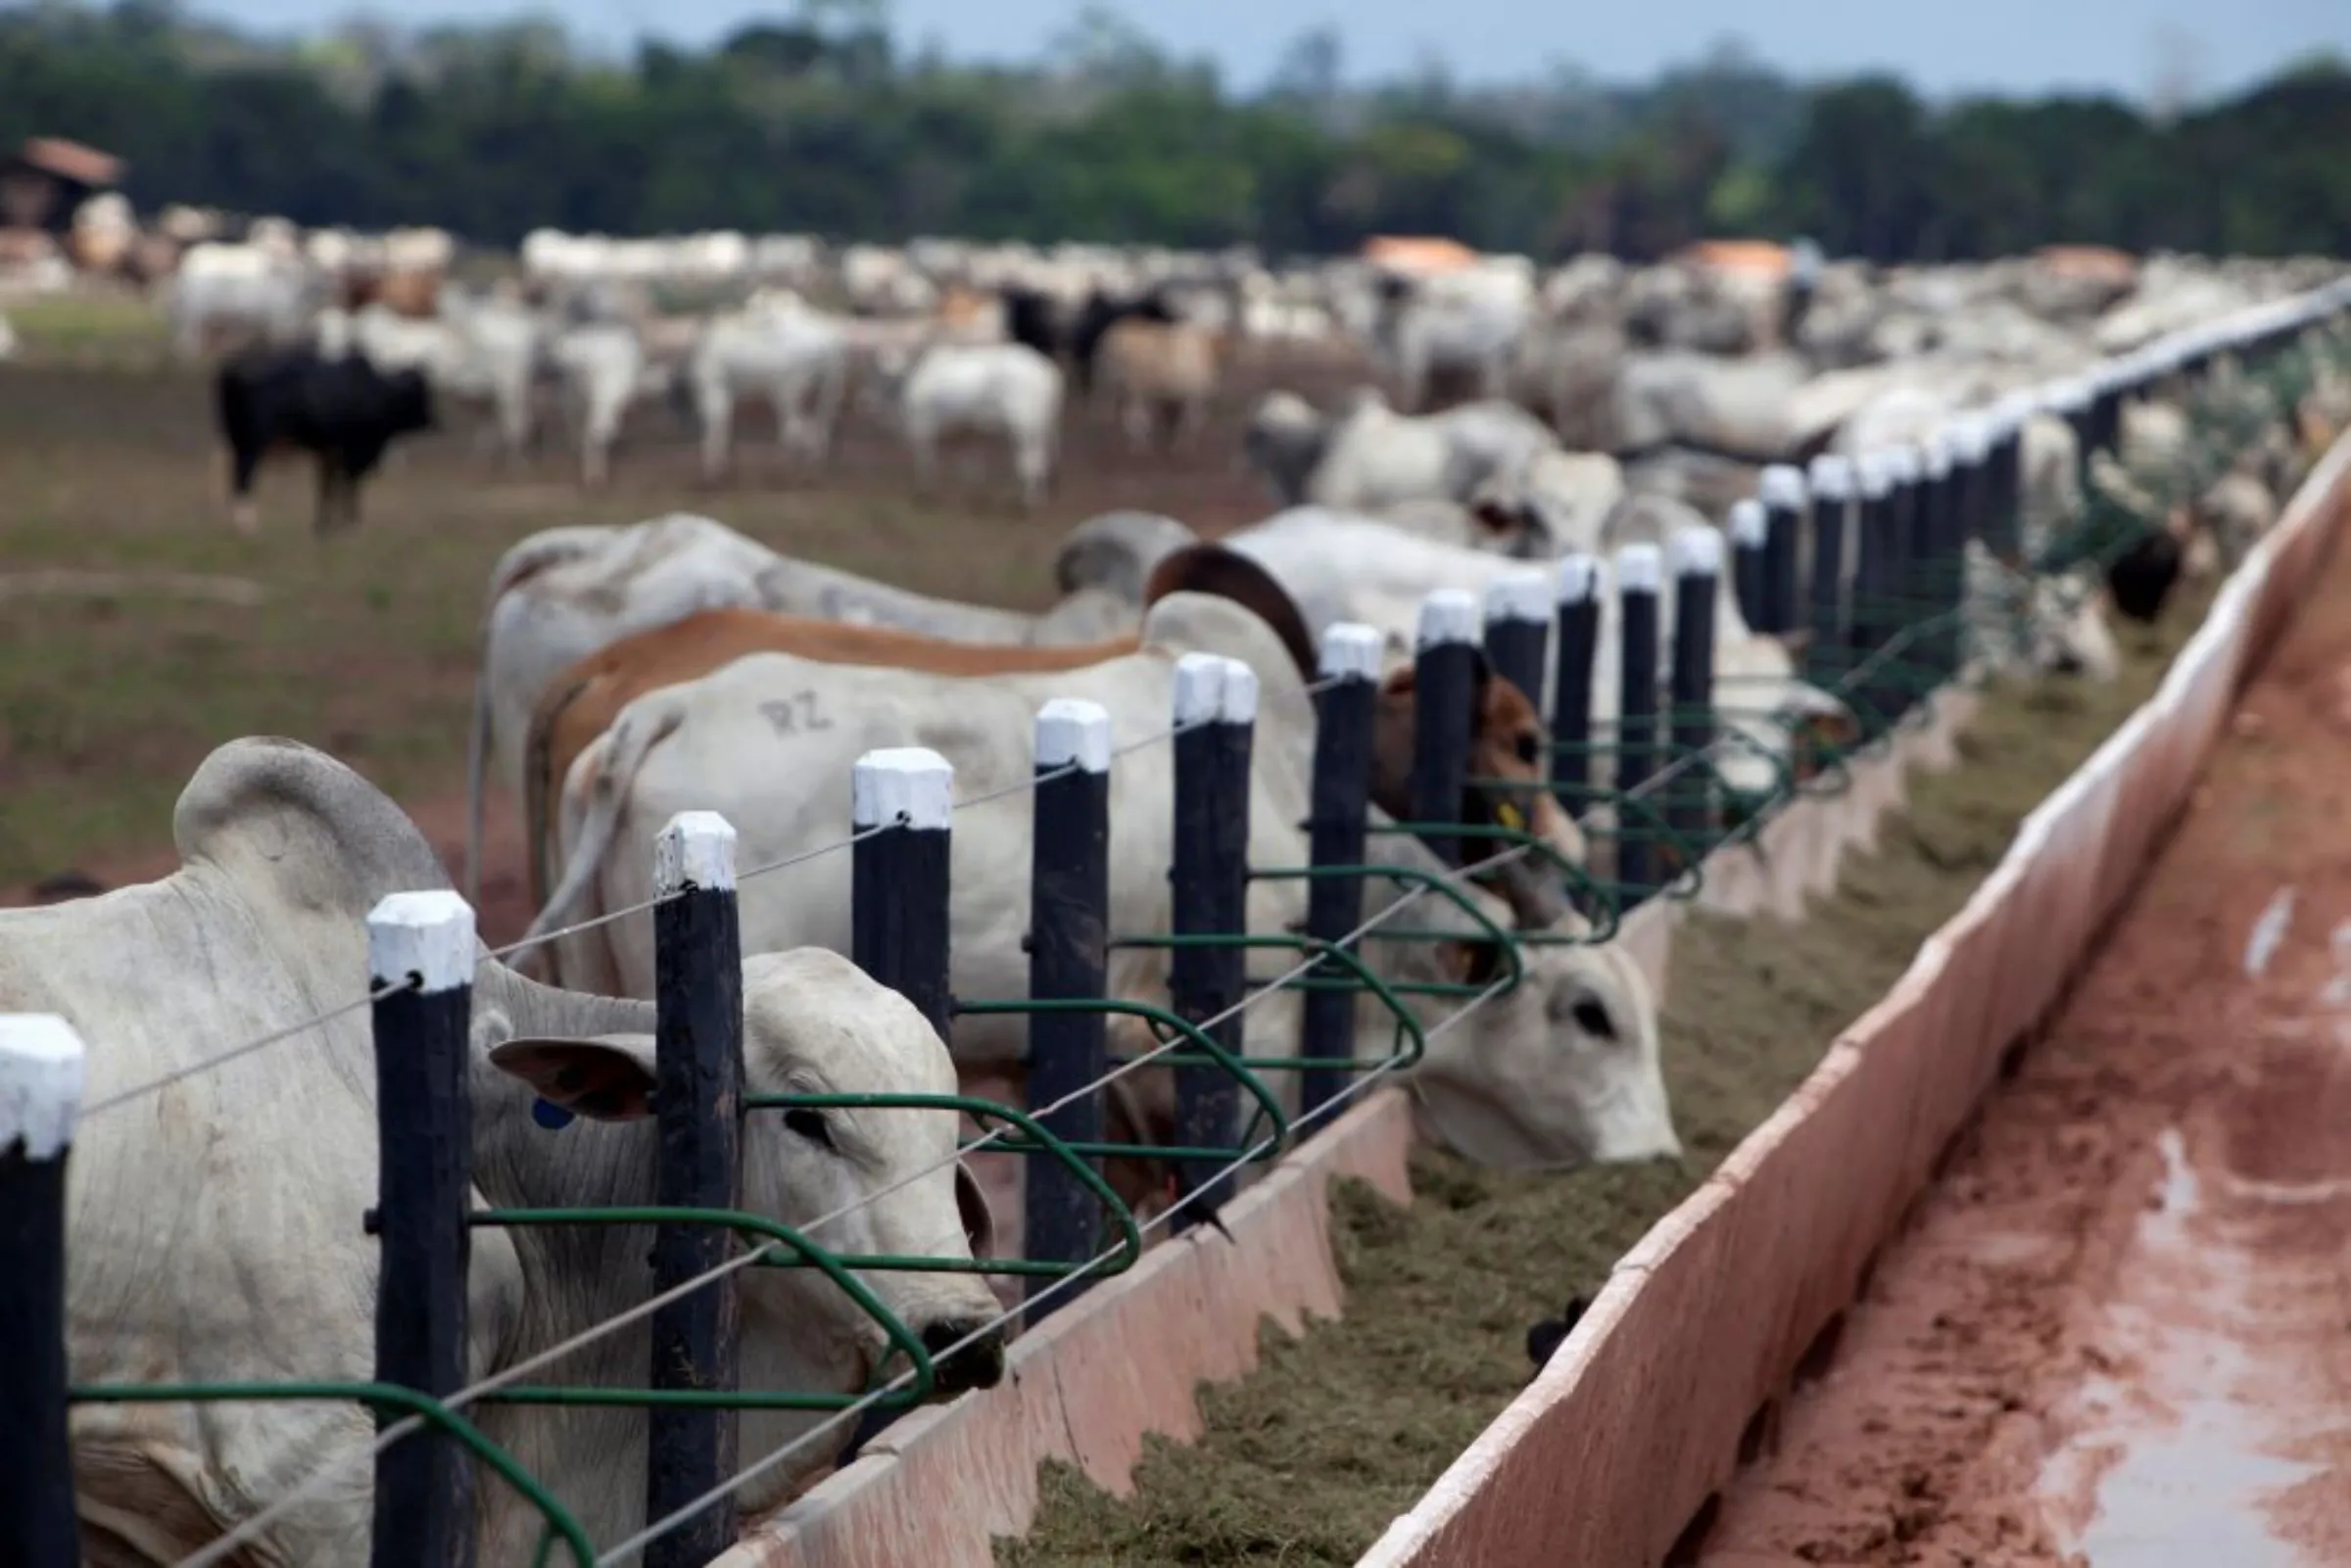 Cattle stand in pens where they arrived from different ranches in the Amazon basin before being trucked to a port for export overseas, in Moju, Para state, near the mouth of the Amazon river, November 7, 2013